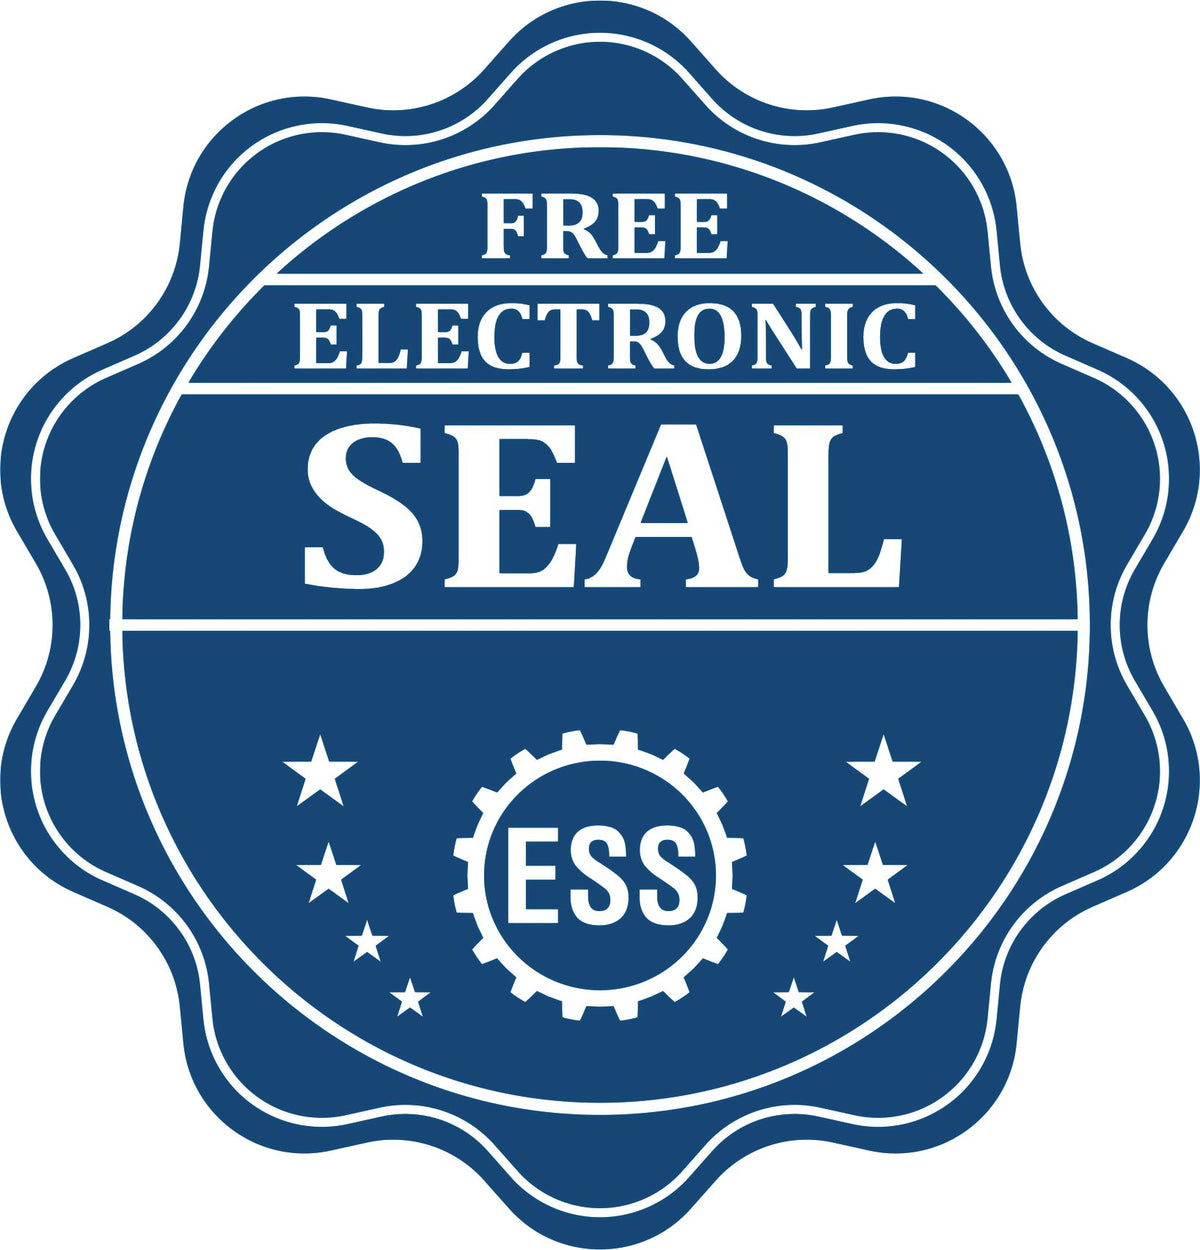 A badge showing a free electronic seal for the Gift Iowa Land Surveyor Seal with stars and the ESS gear on the emblem.